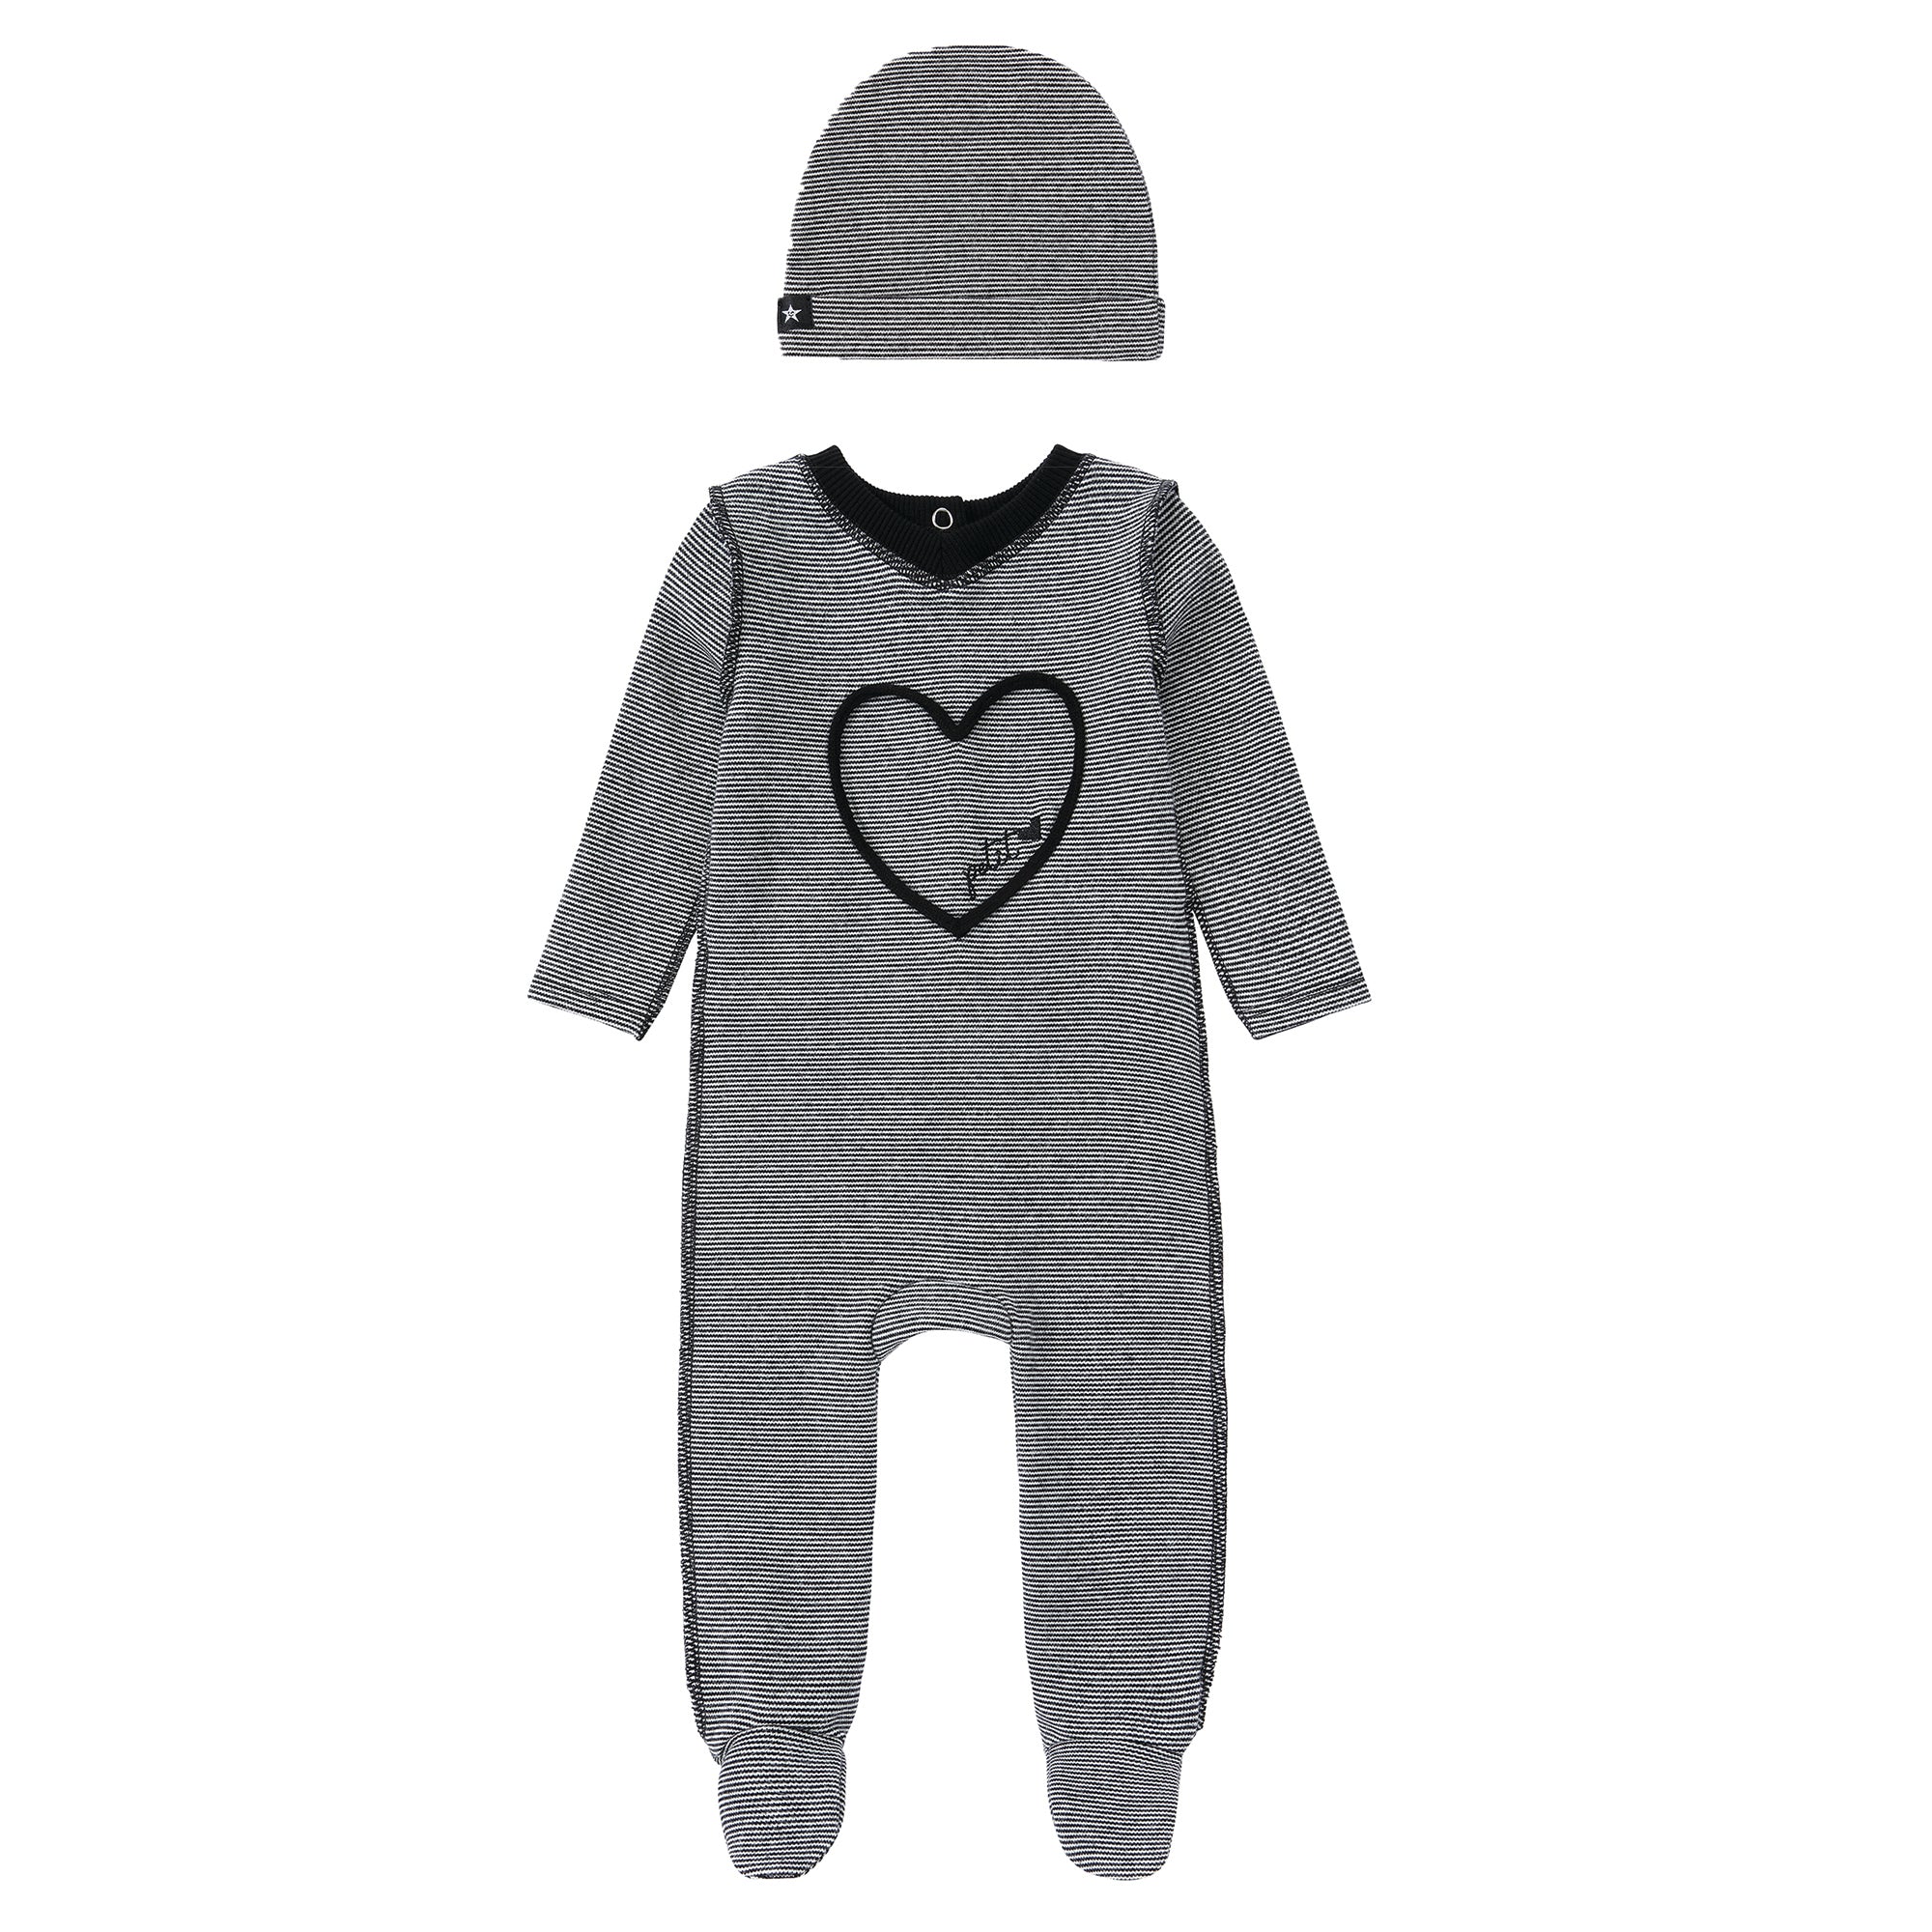 Black and White Striped Footie With Heart Detail